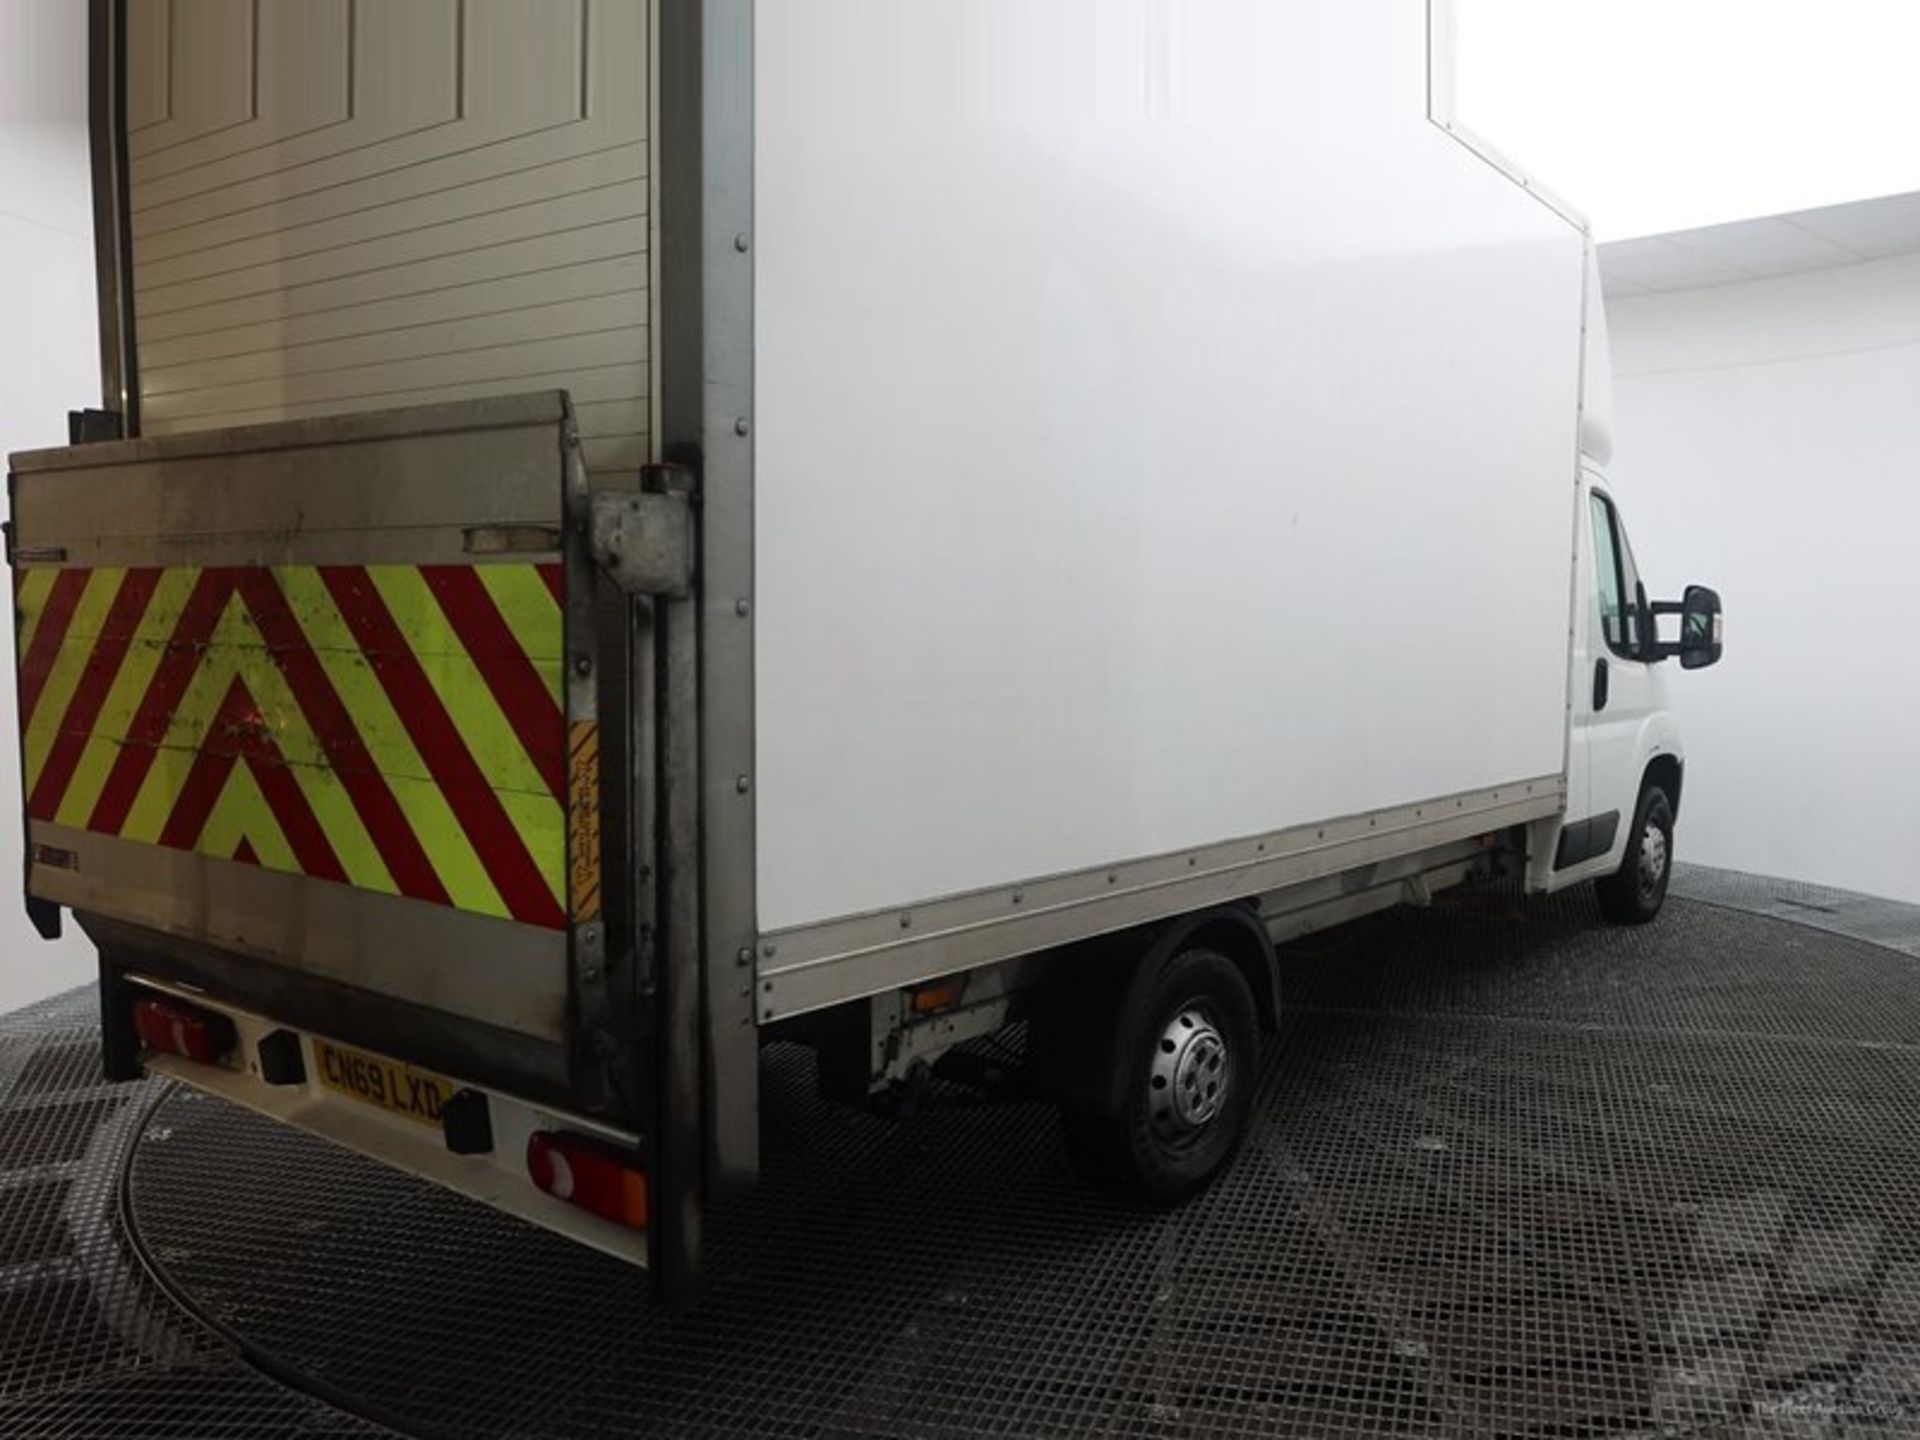 CITROEN RELAY 2.0HDI"160"LONG WHEEL BASE LUTON BOX VAN WITH ELECTRIC TAIL-LIFT -2020 MODEL -1 OWNER - Image 5 of 10